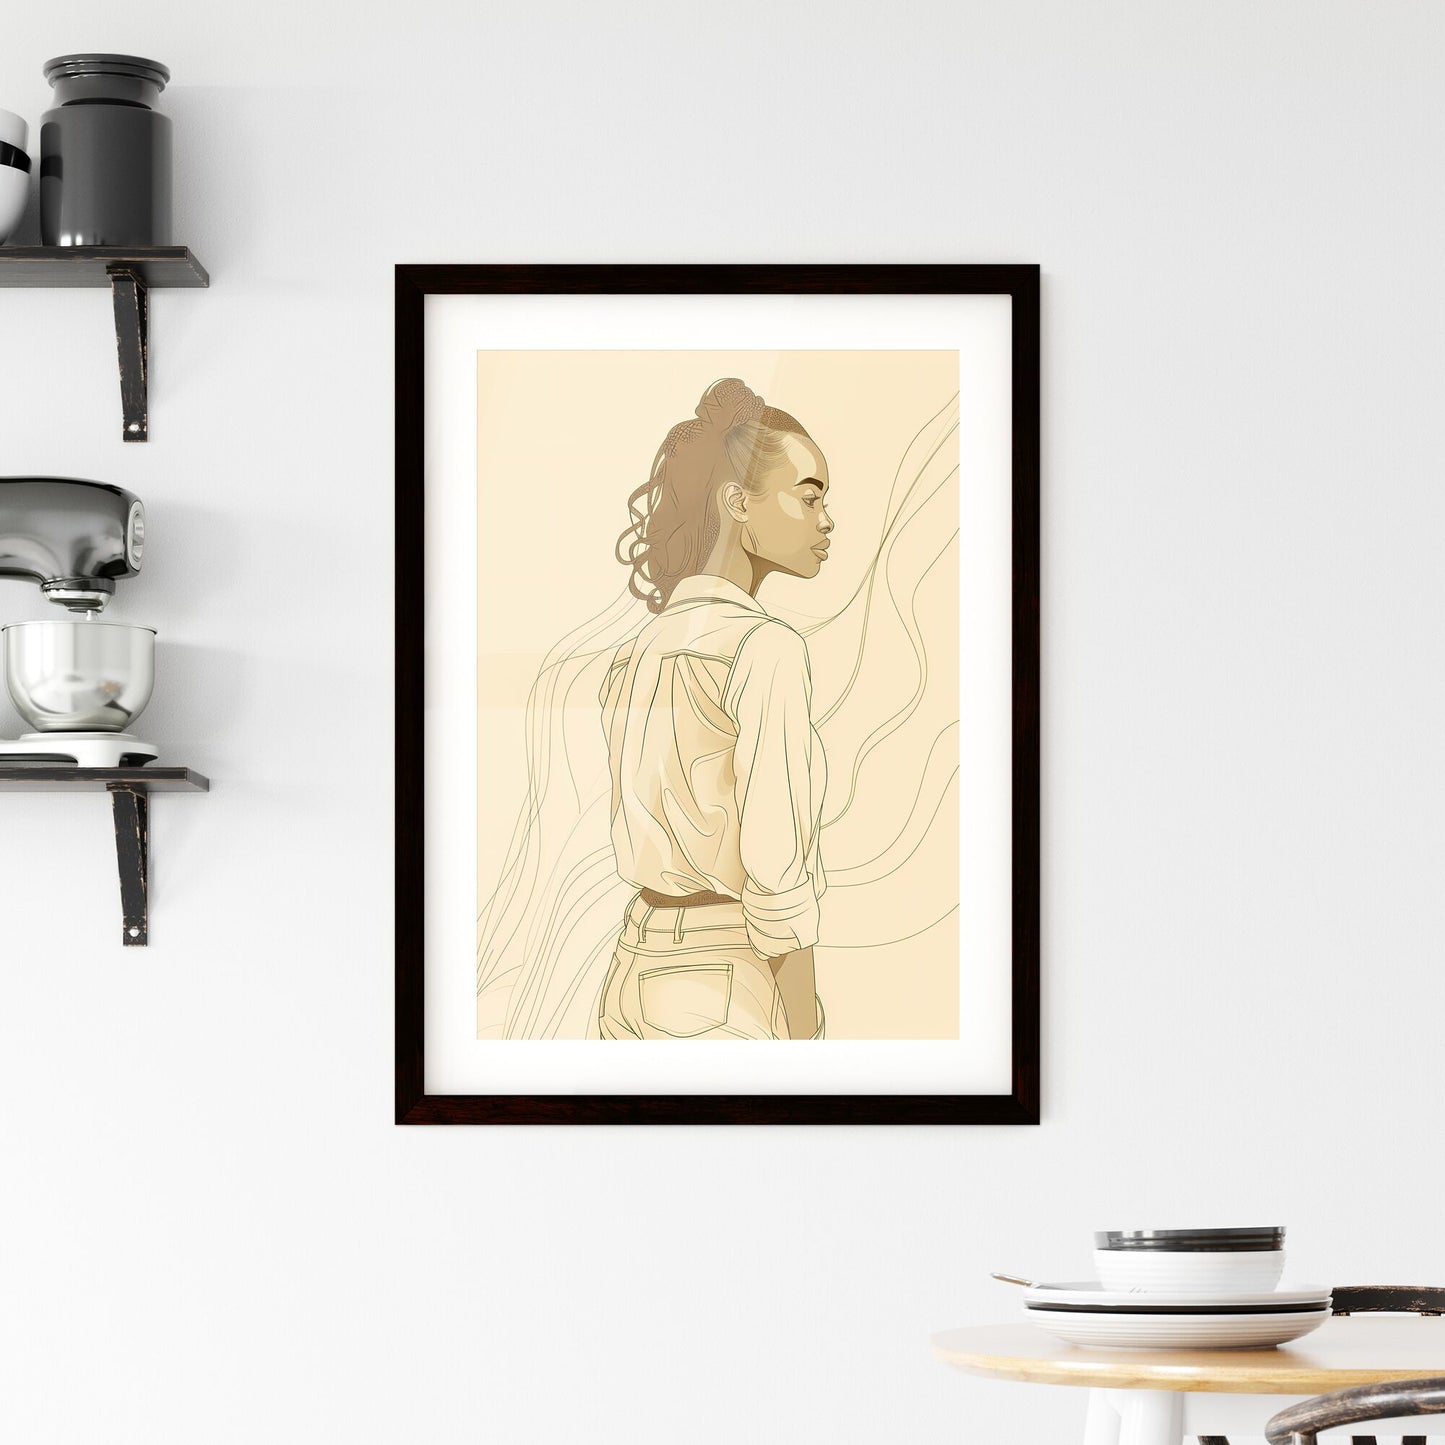 Bold Line Art of an African Woman's Graceful Hips in Vibrant Harmony, Minimalist White Background, Celebrating the Beauty of Femininity and Culture Default Title